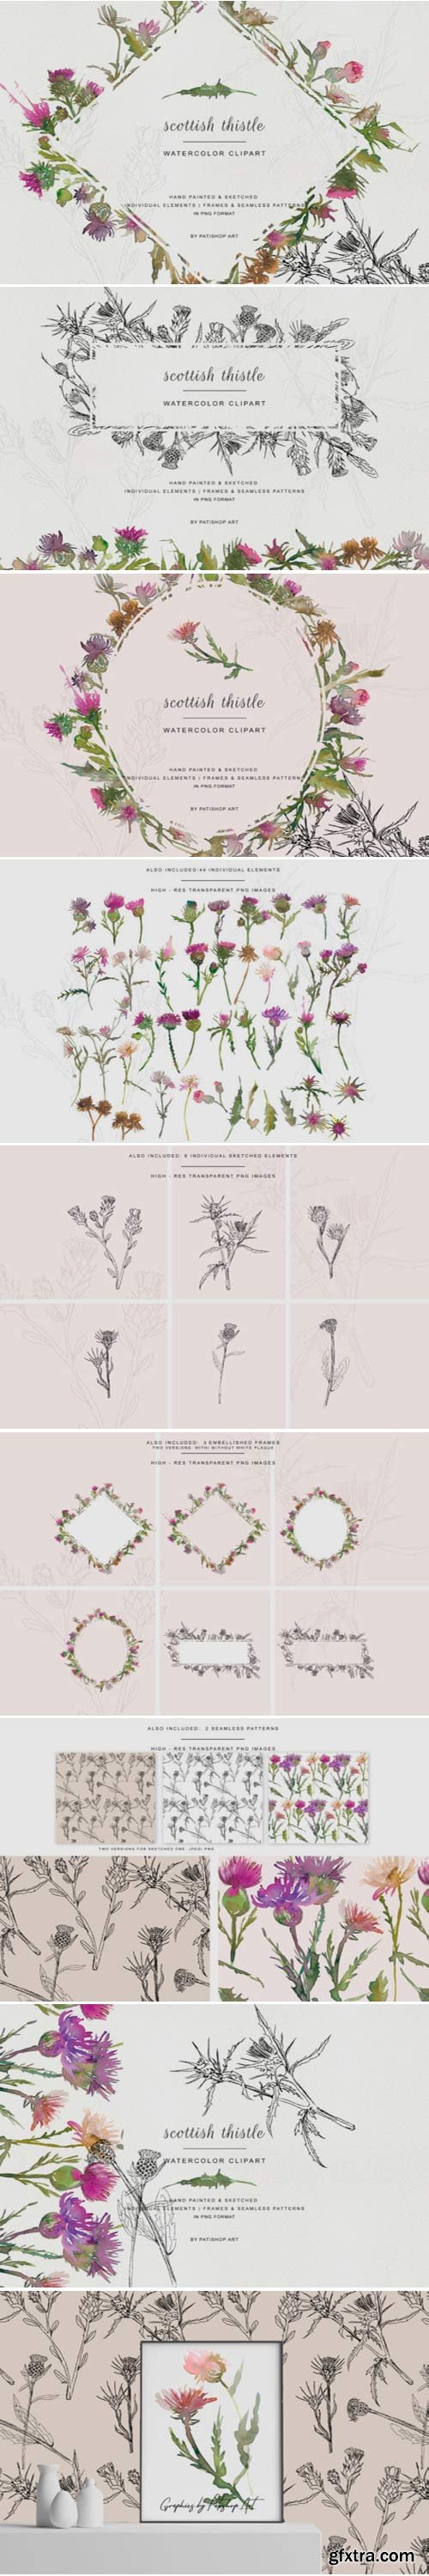 Hand Painted & Sketched Thistle Clip Art 1584504